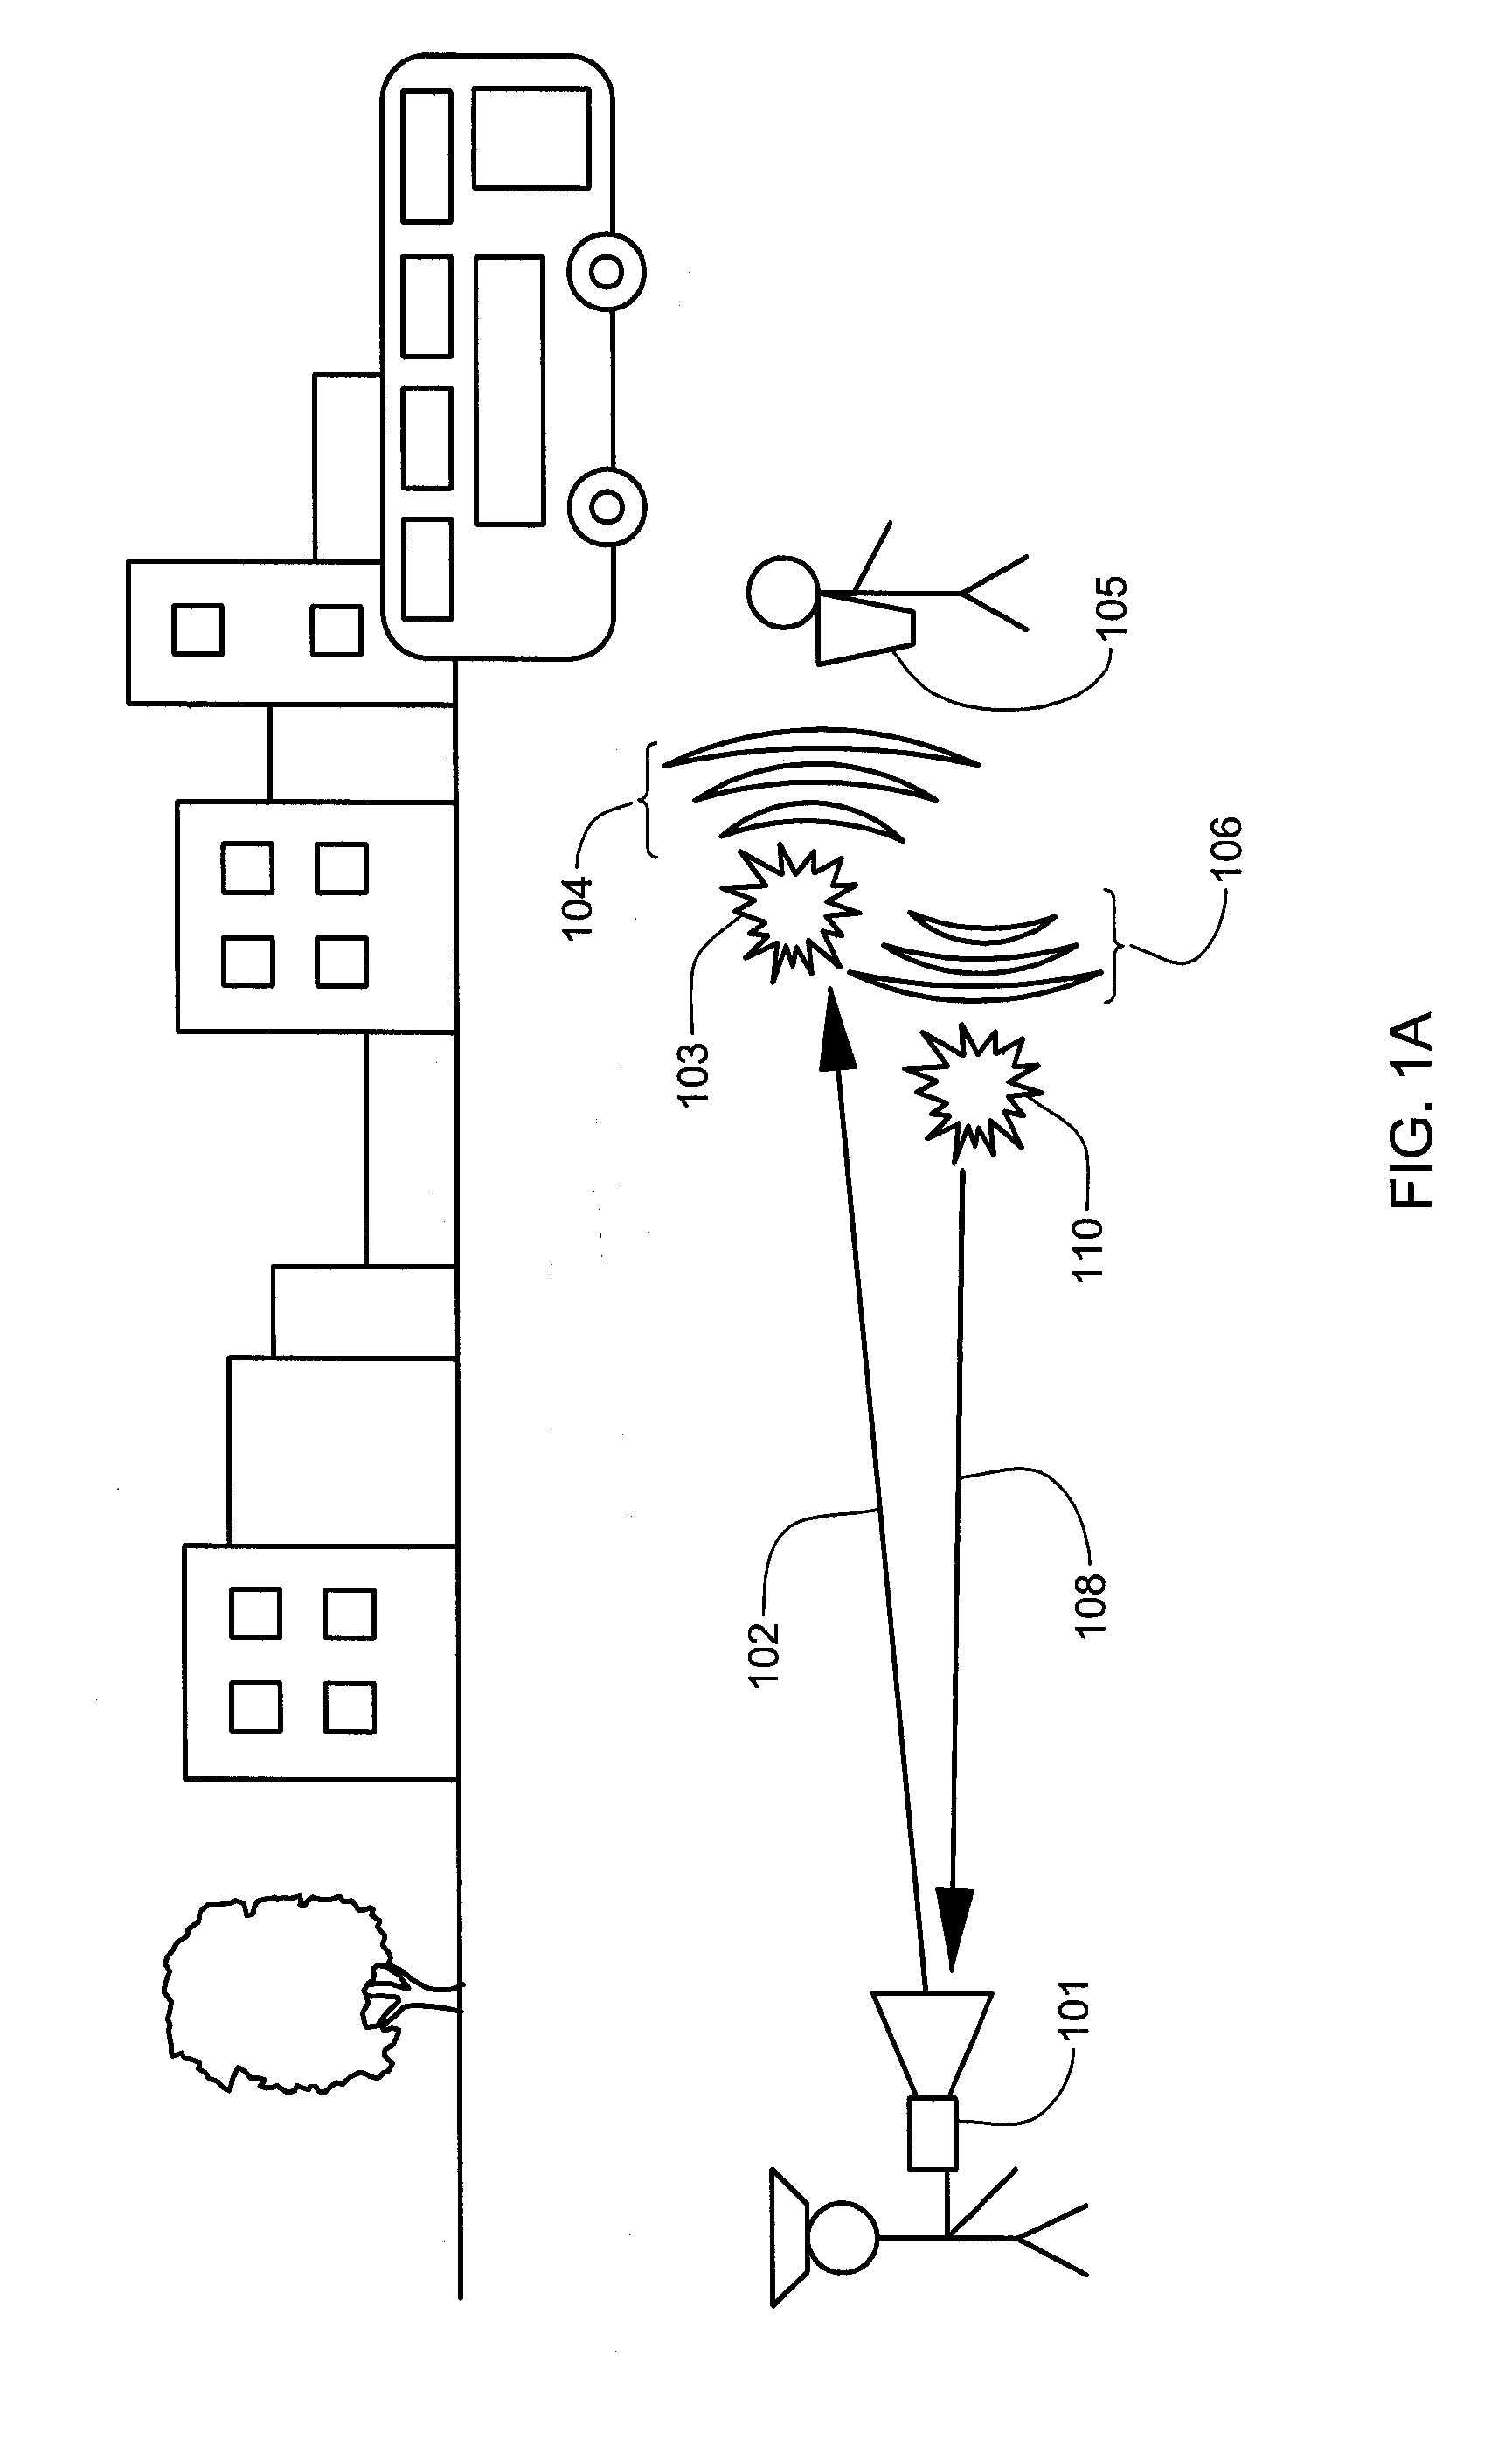 Method of analyzing a remotely-located object utilizing an optical technique to detect terahertz radiation